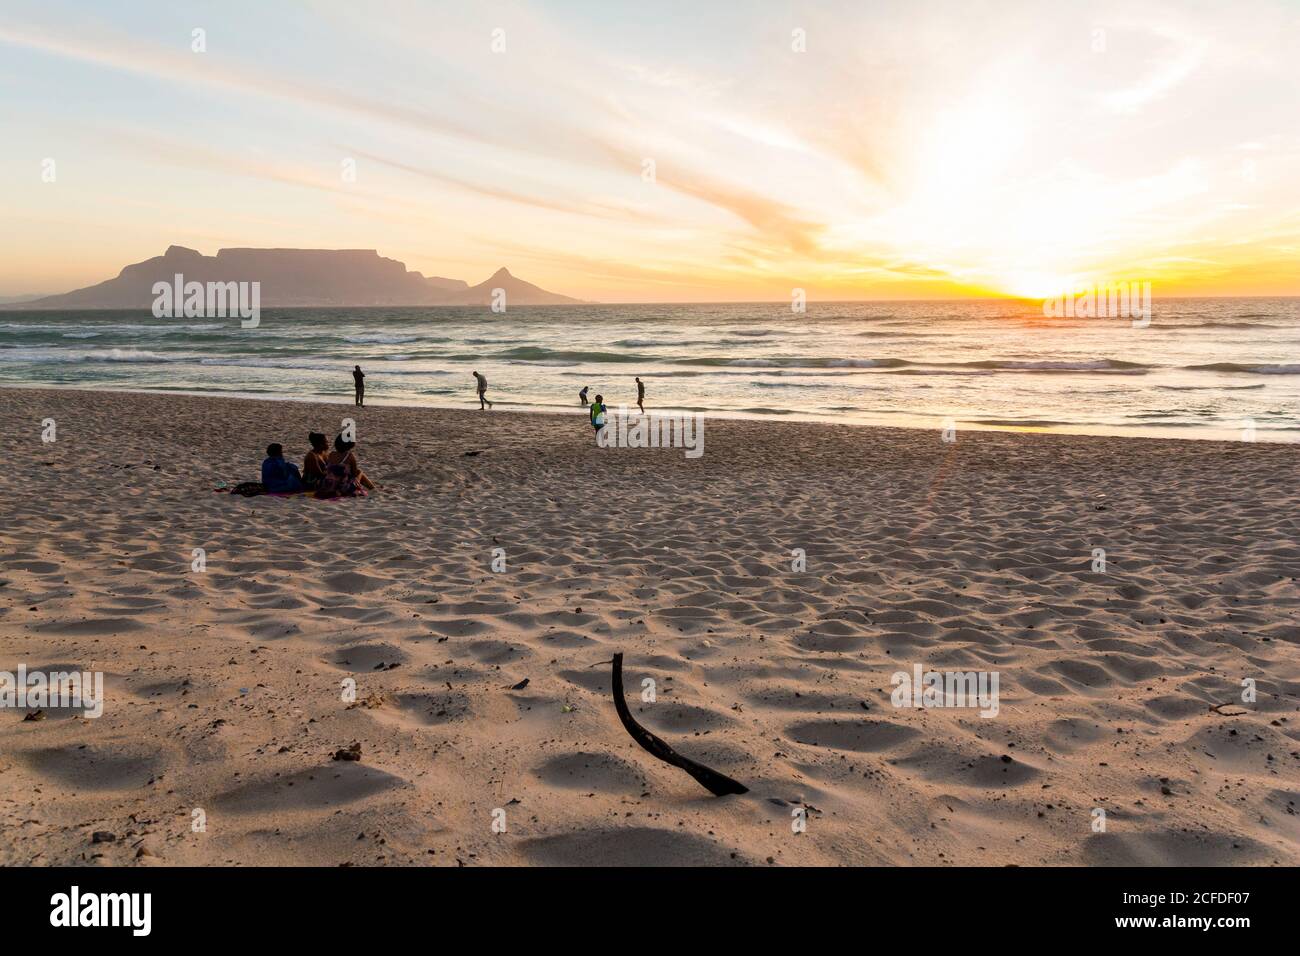 Bloubergstrand (Blouberg Beach) in Cape Town at sunset, Cape Town, South Africa Stock Photo